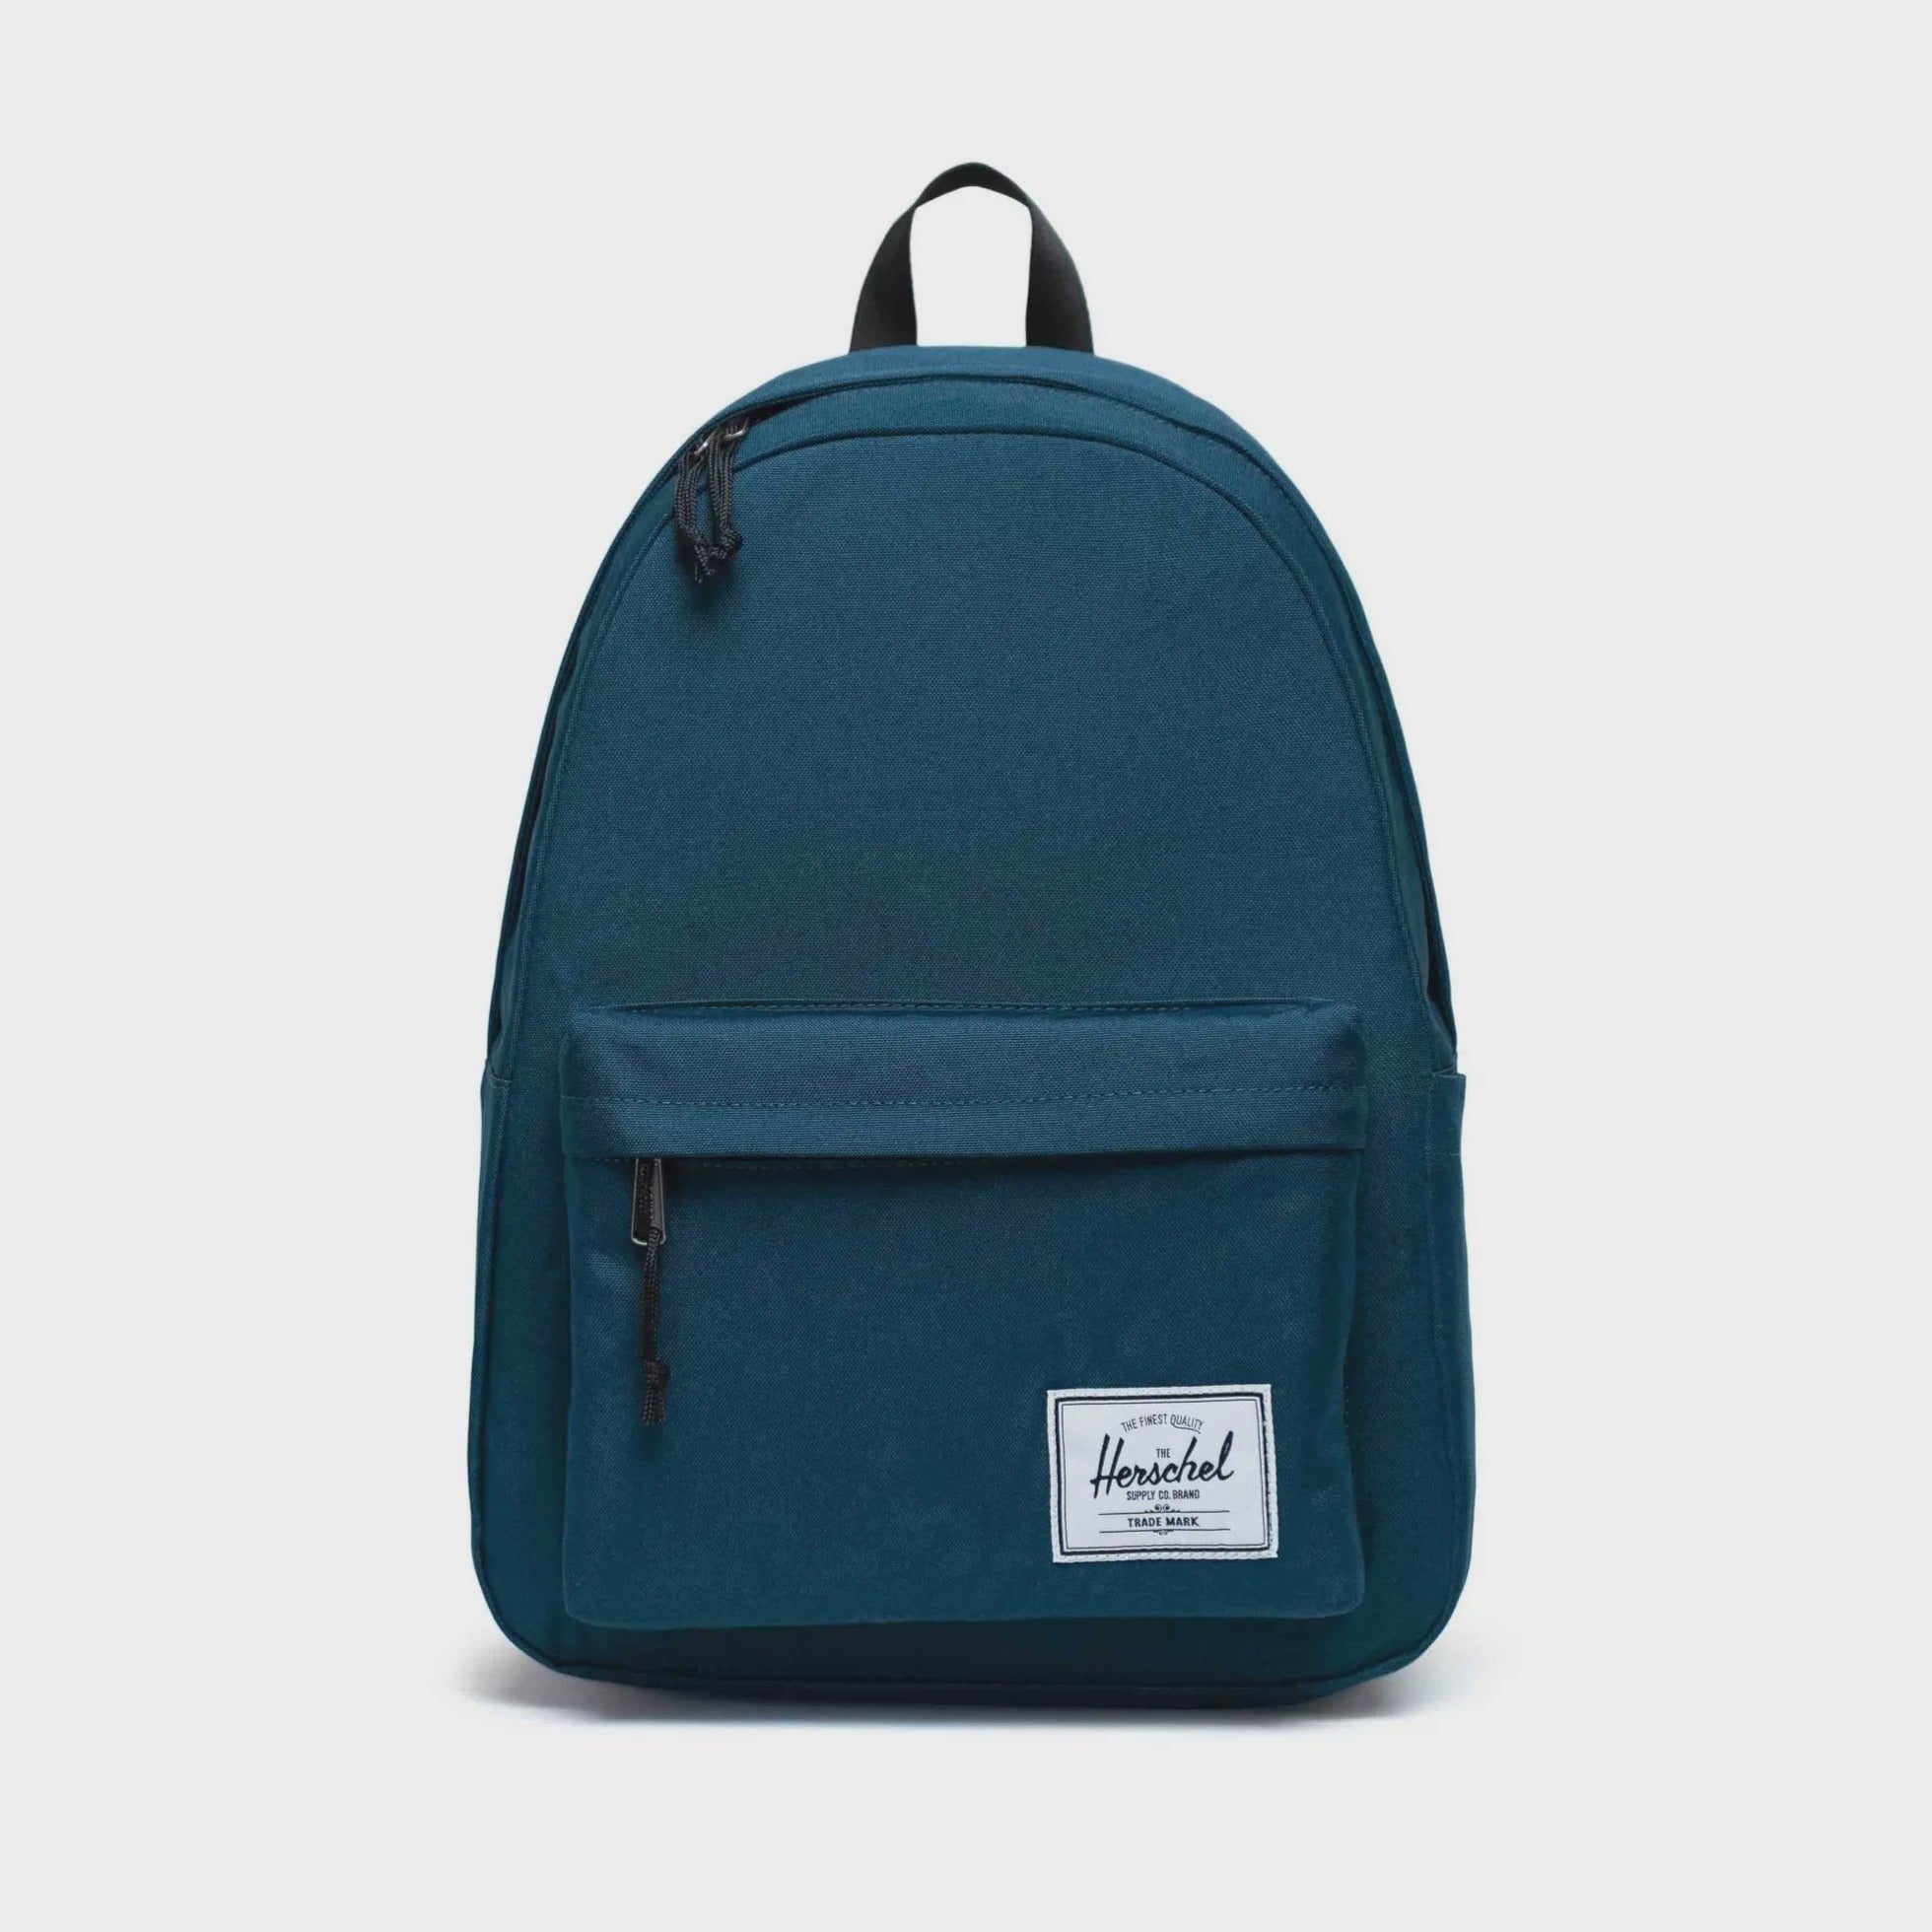 HERSCHEL - CLASSIC XL BACKPACK IN REFLECTING POND